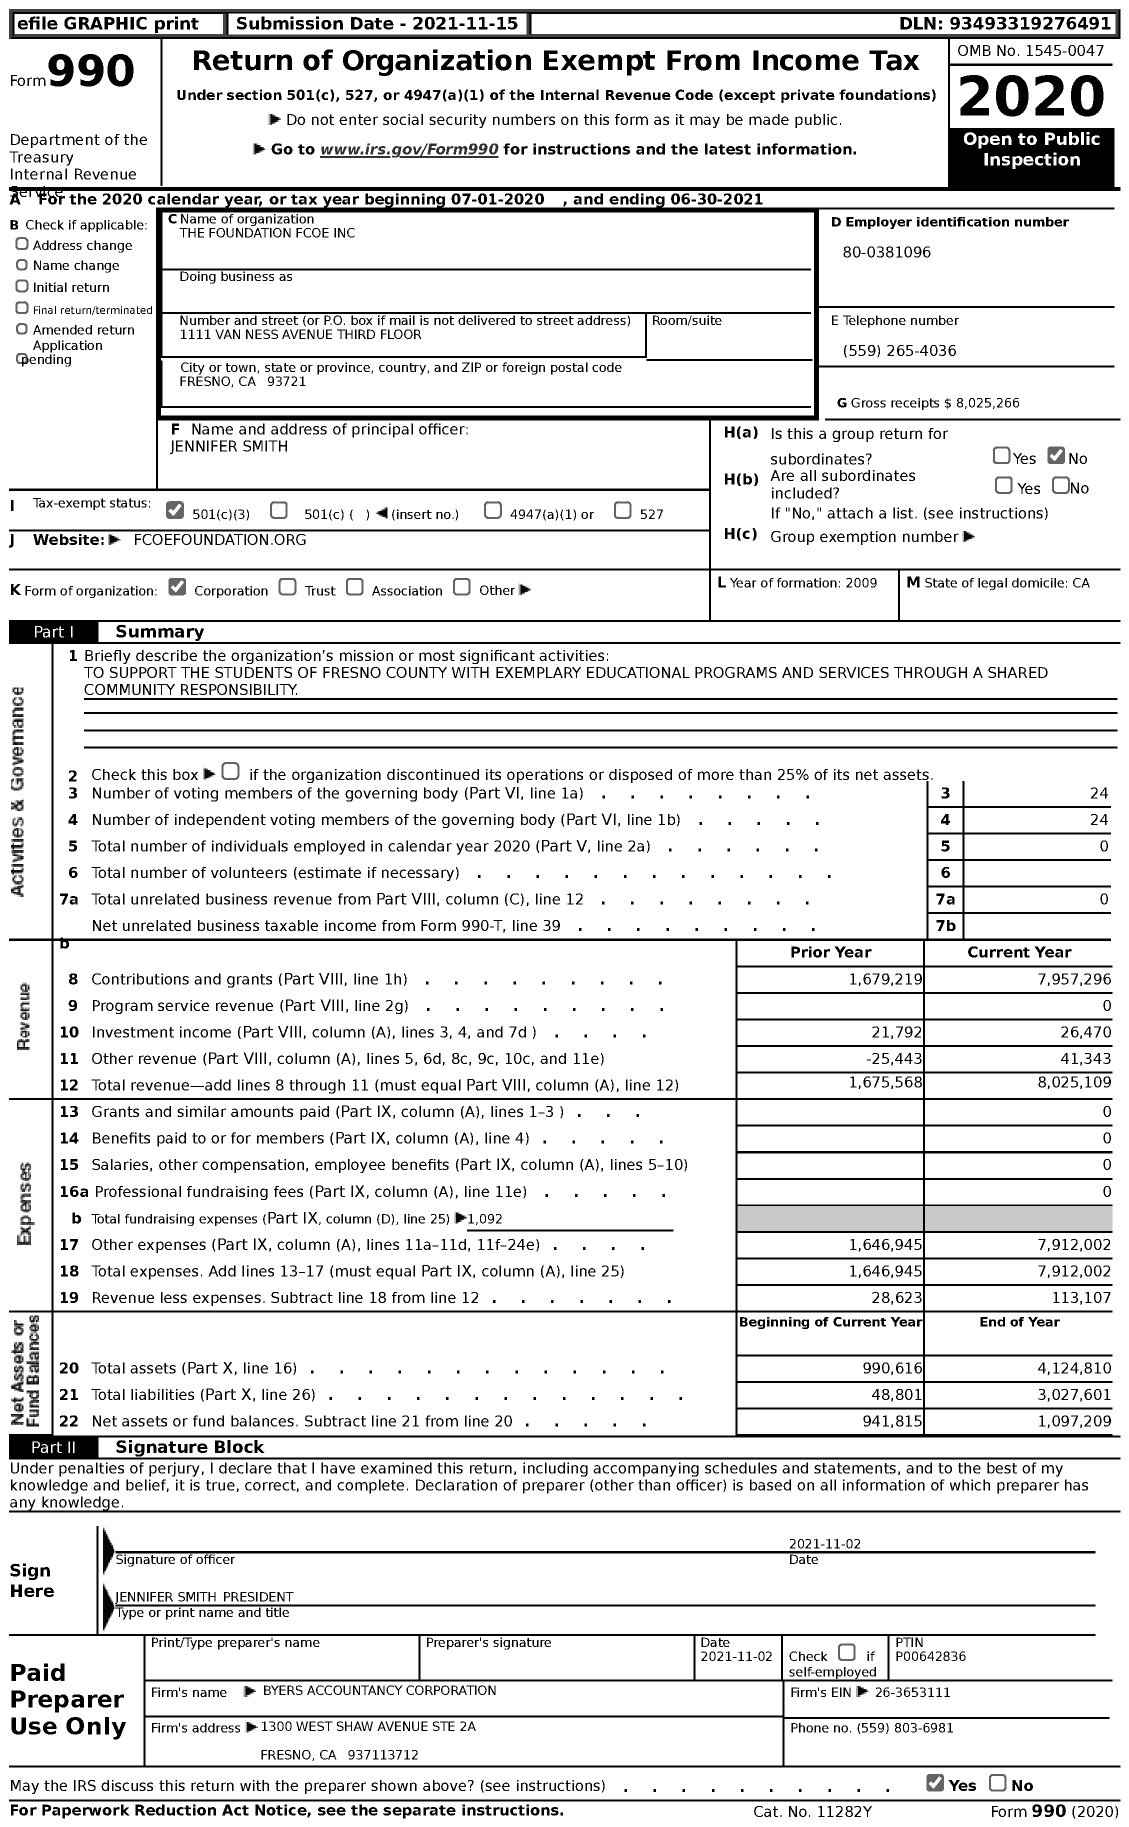 Image of first page of 2020 Form 990 for The Foundation Fcoe